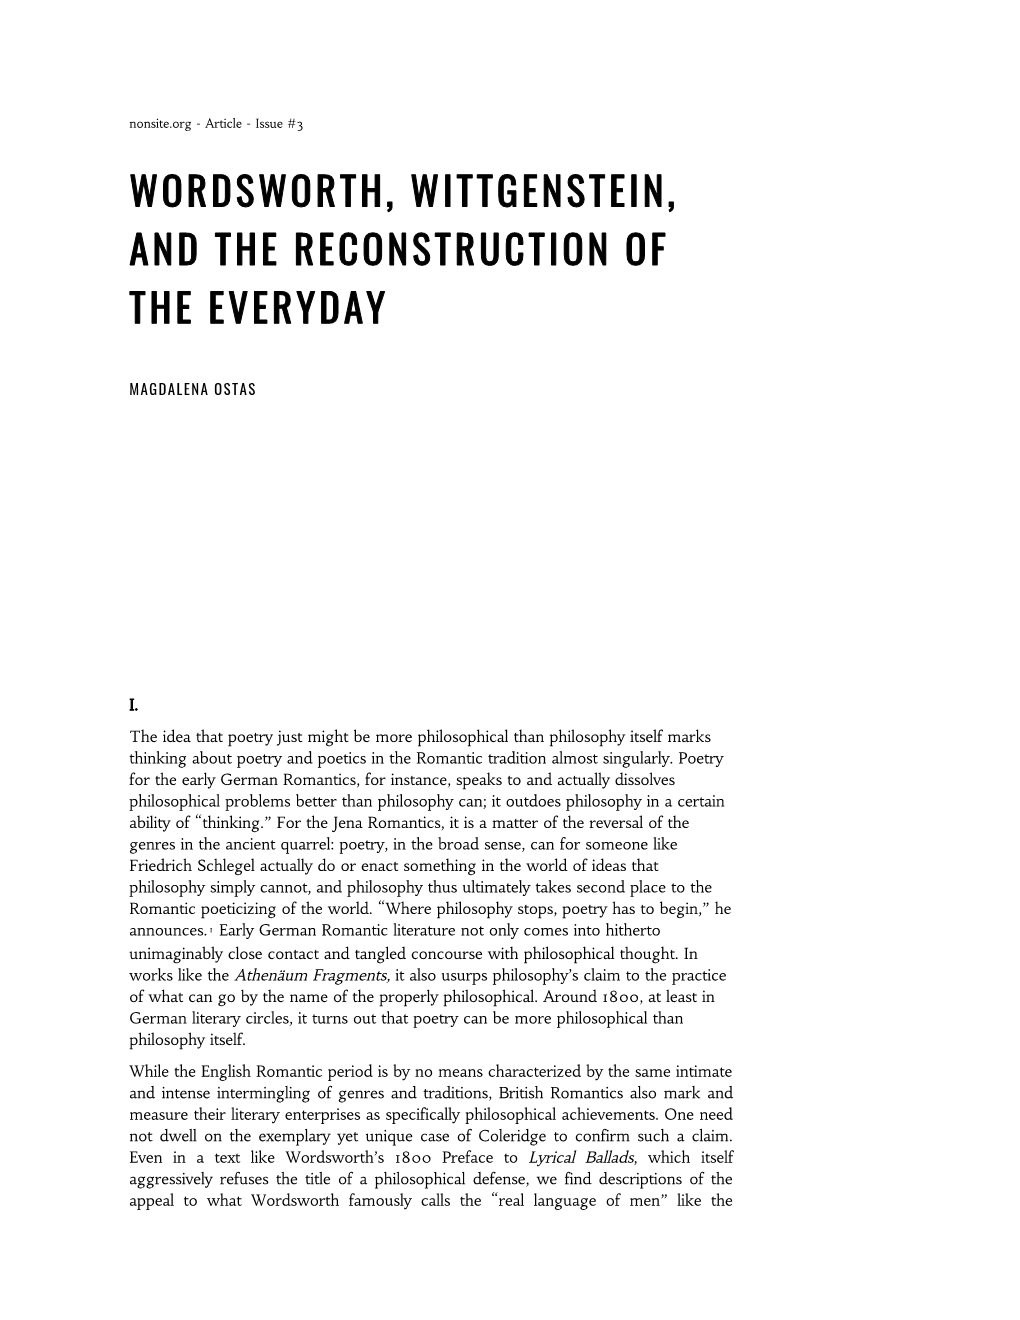 Wordsworth, Wittgenstein, and the Reconstruction of the Everyday | Nonsite.Org